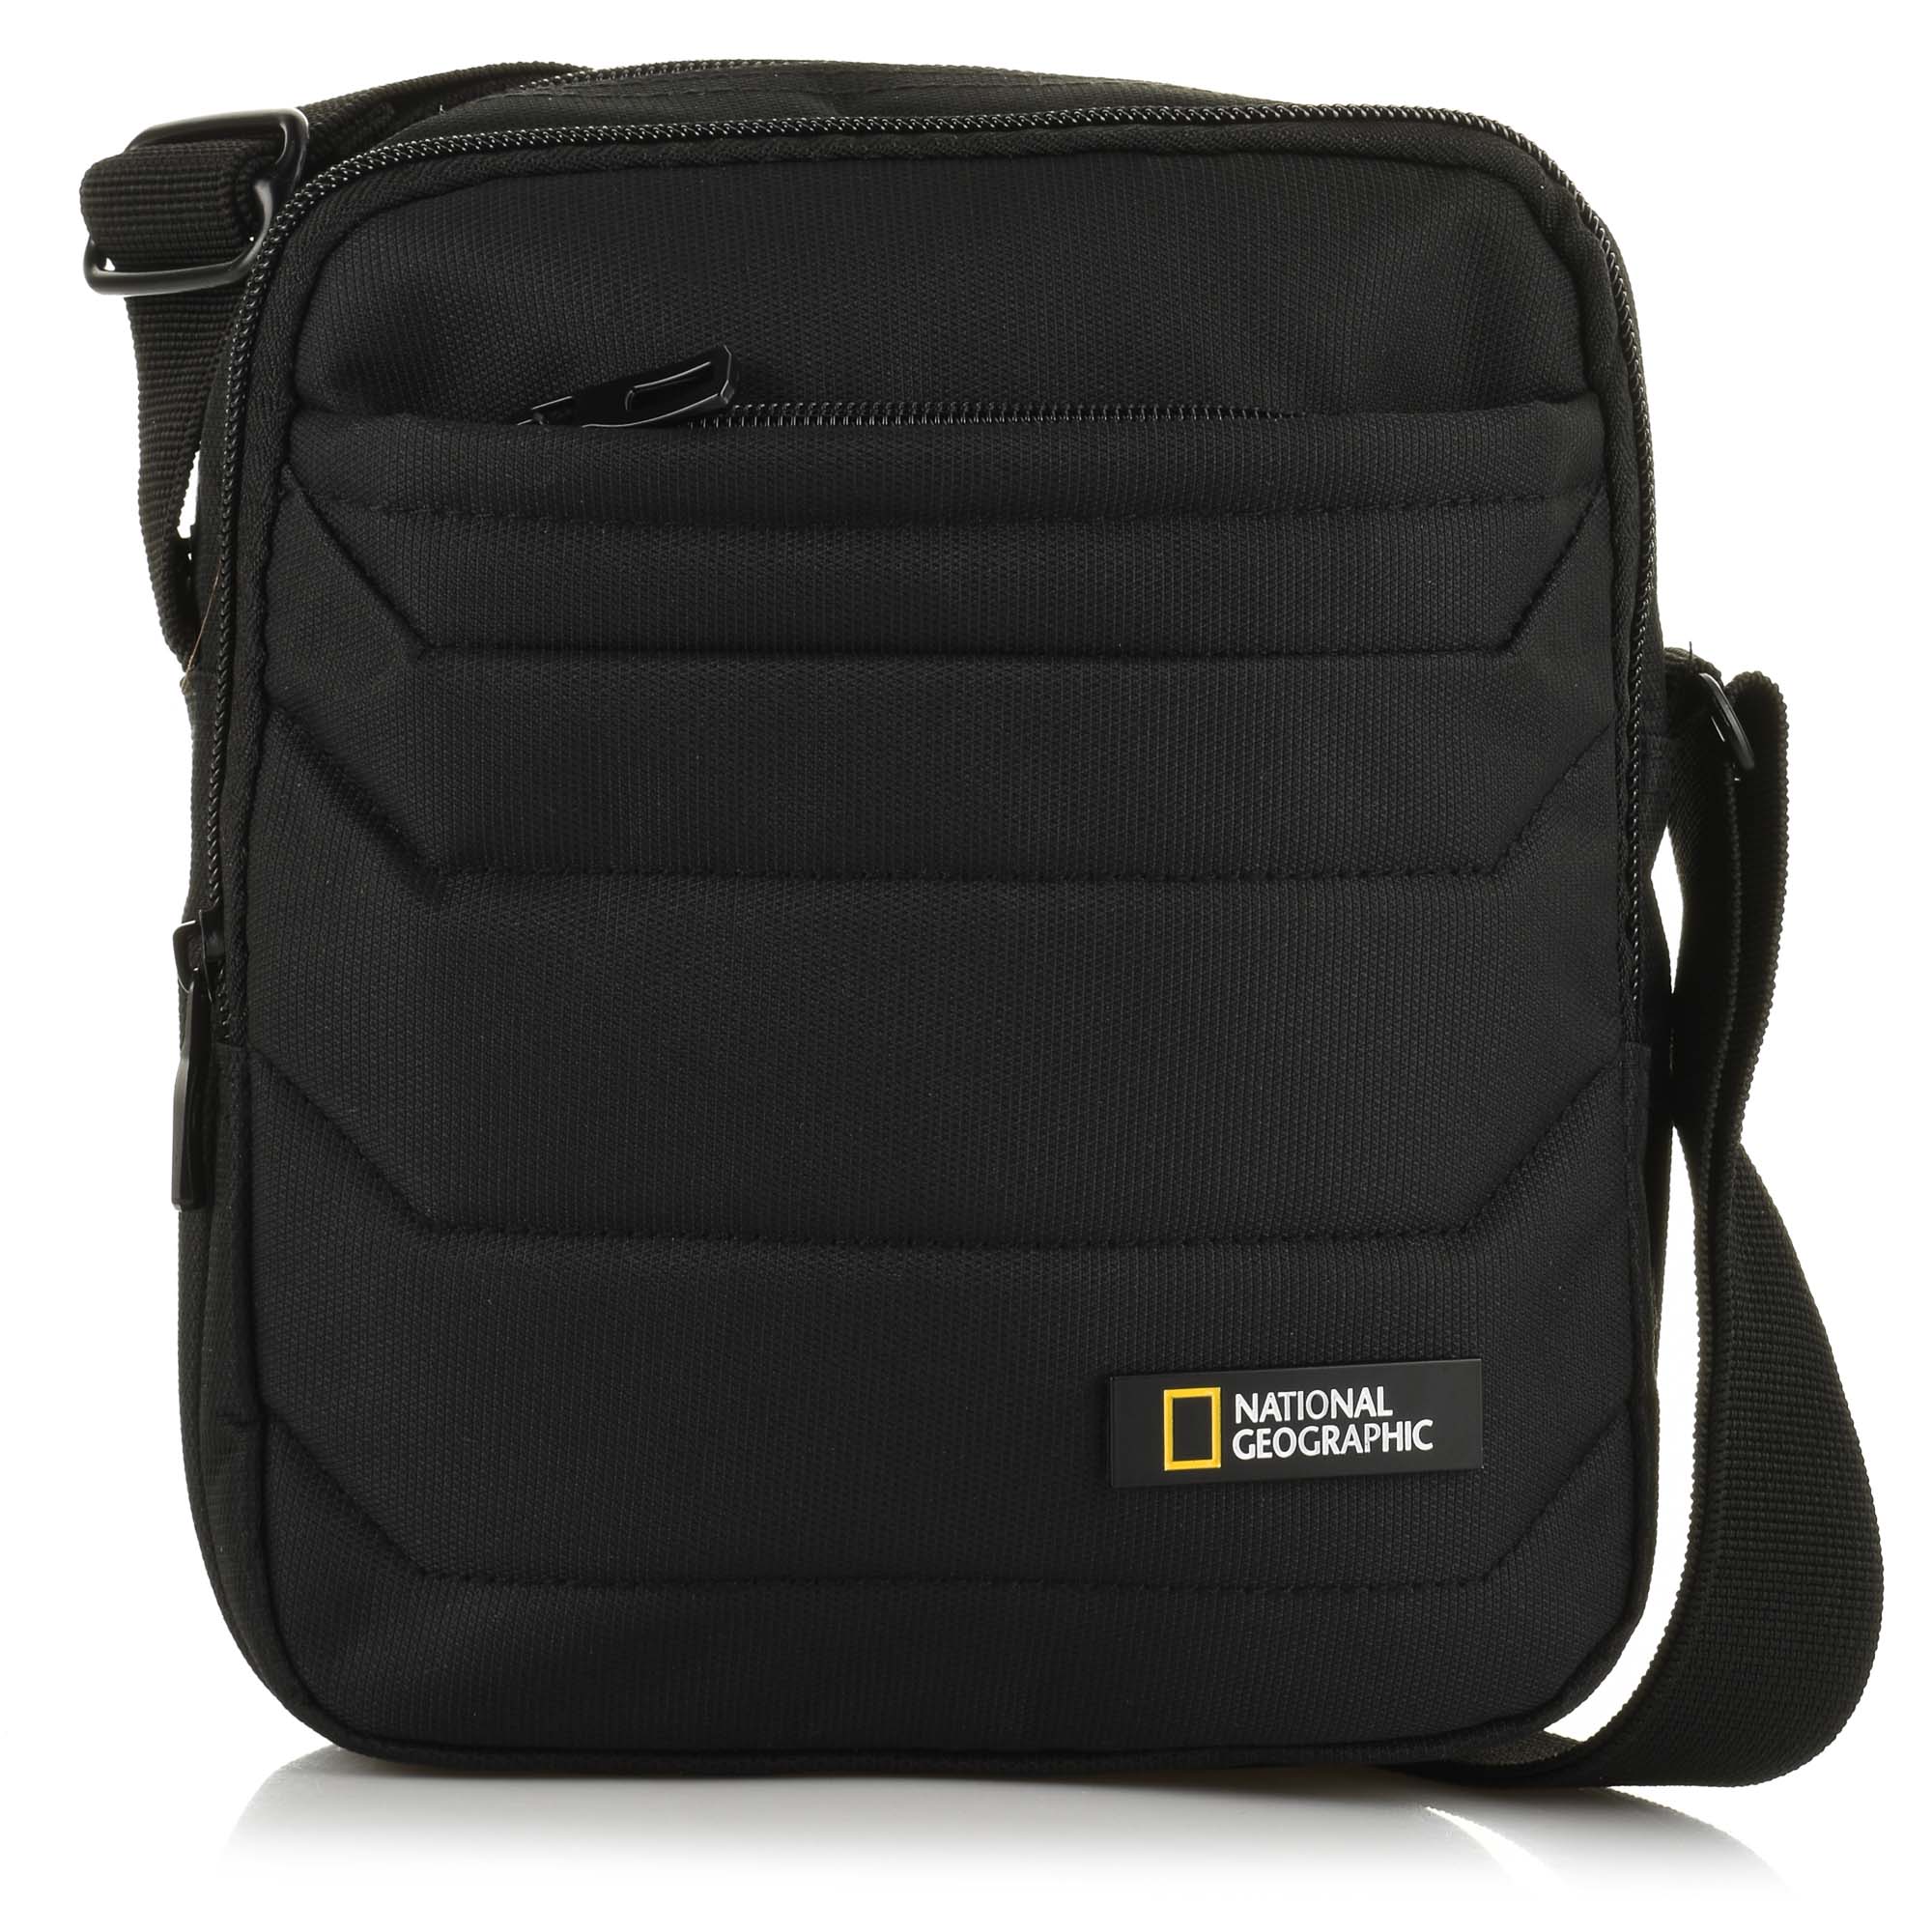 National Geographic Τσαντάκι Χιαστί National Geographic Pro Range Utility Bag N00702.06 Black